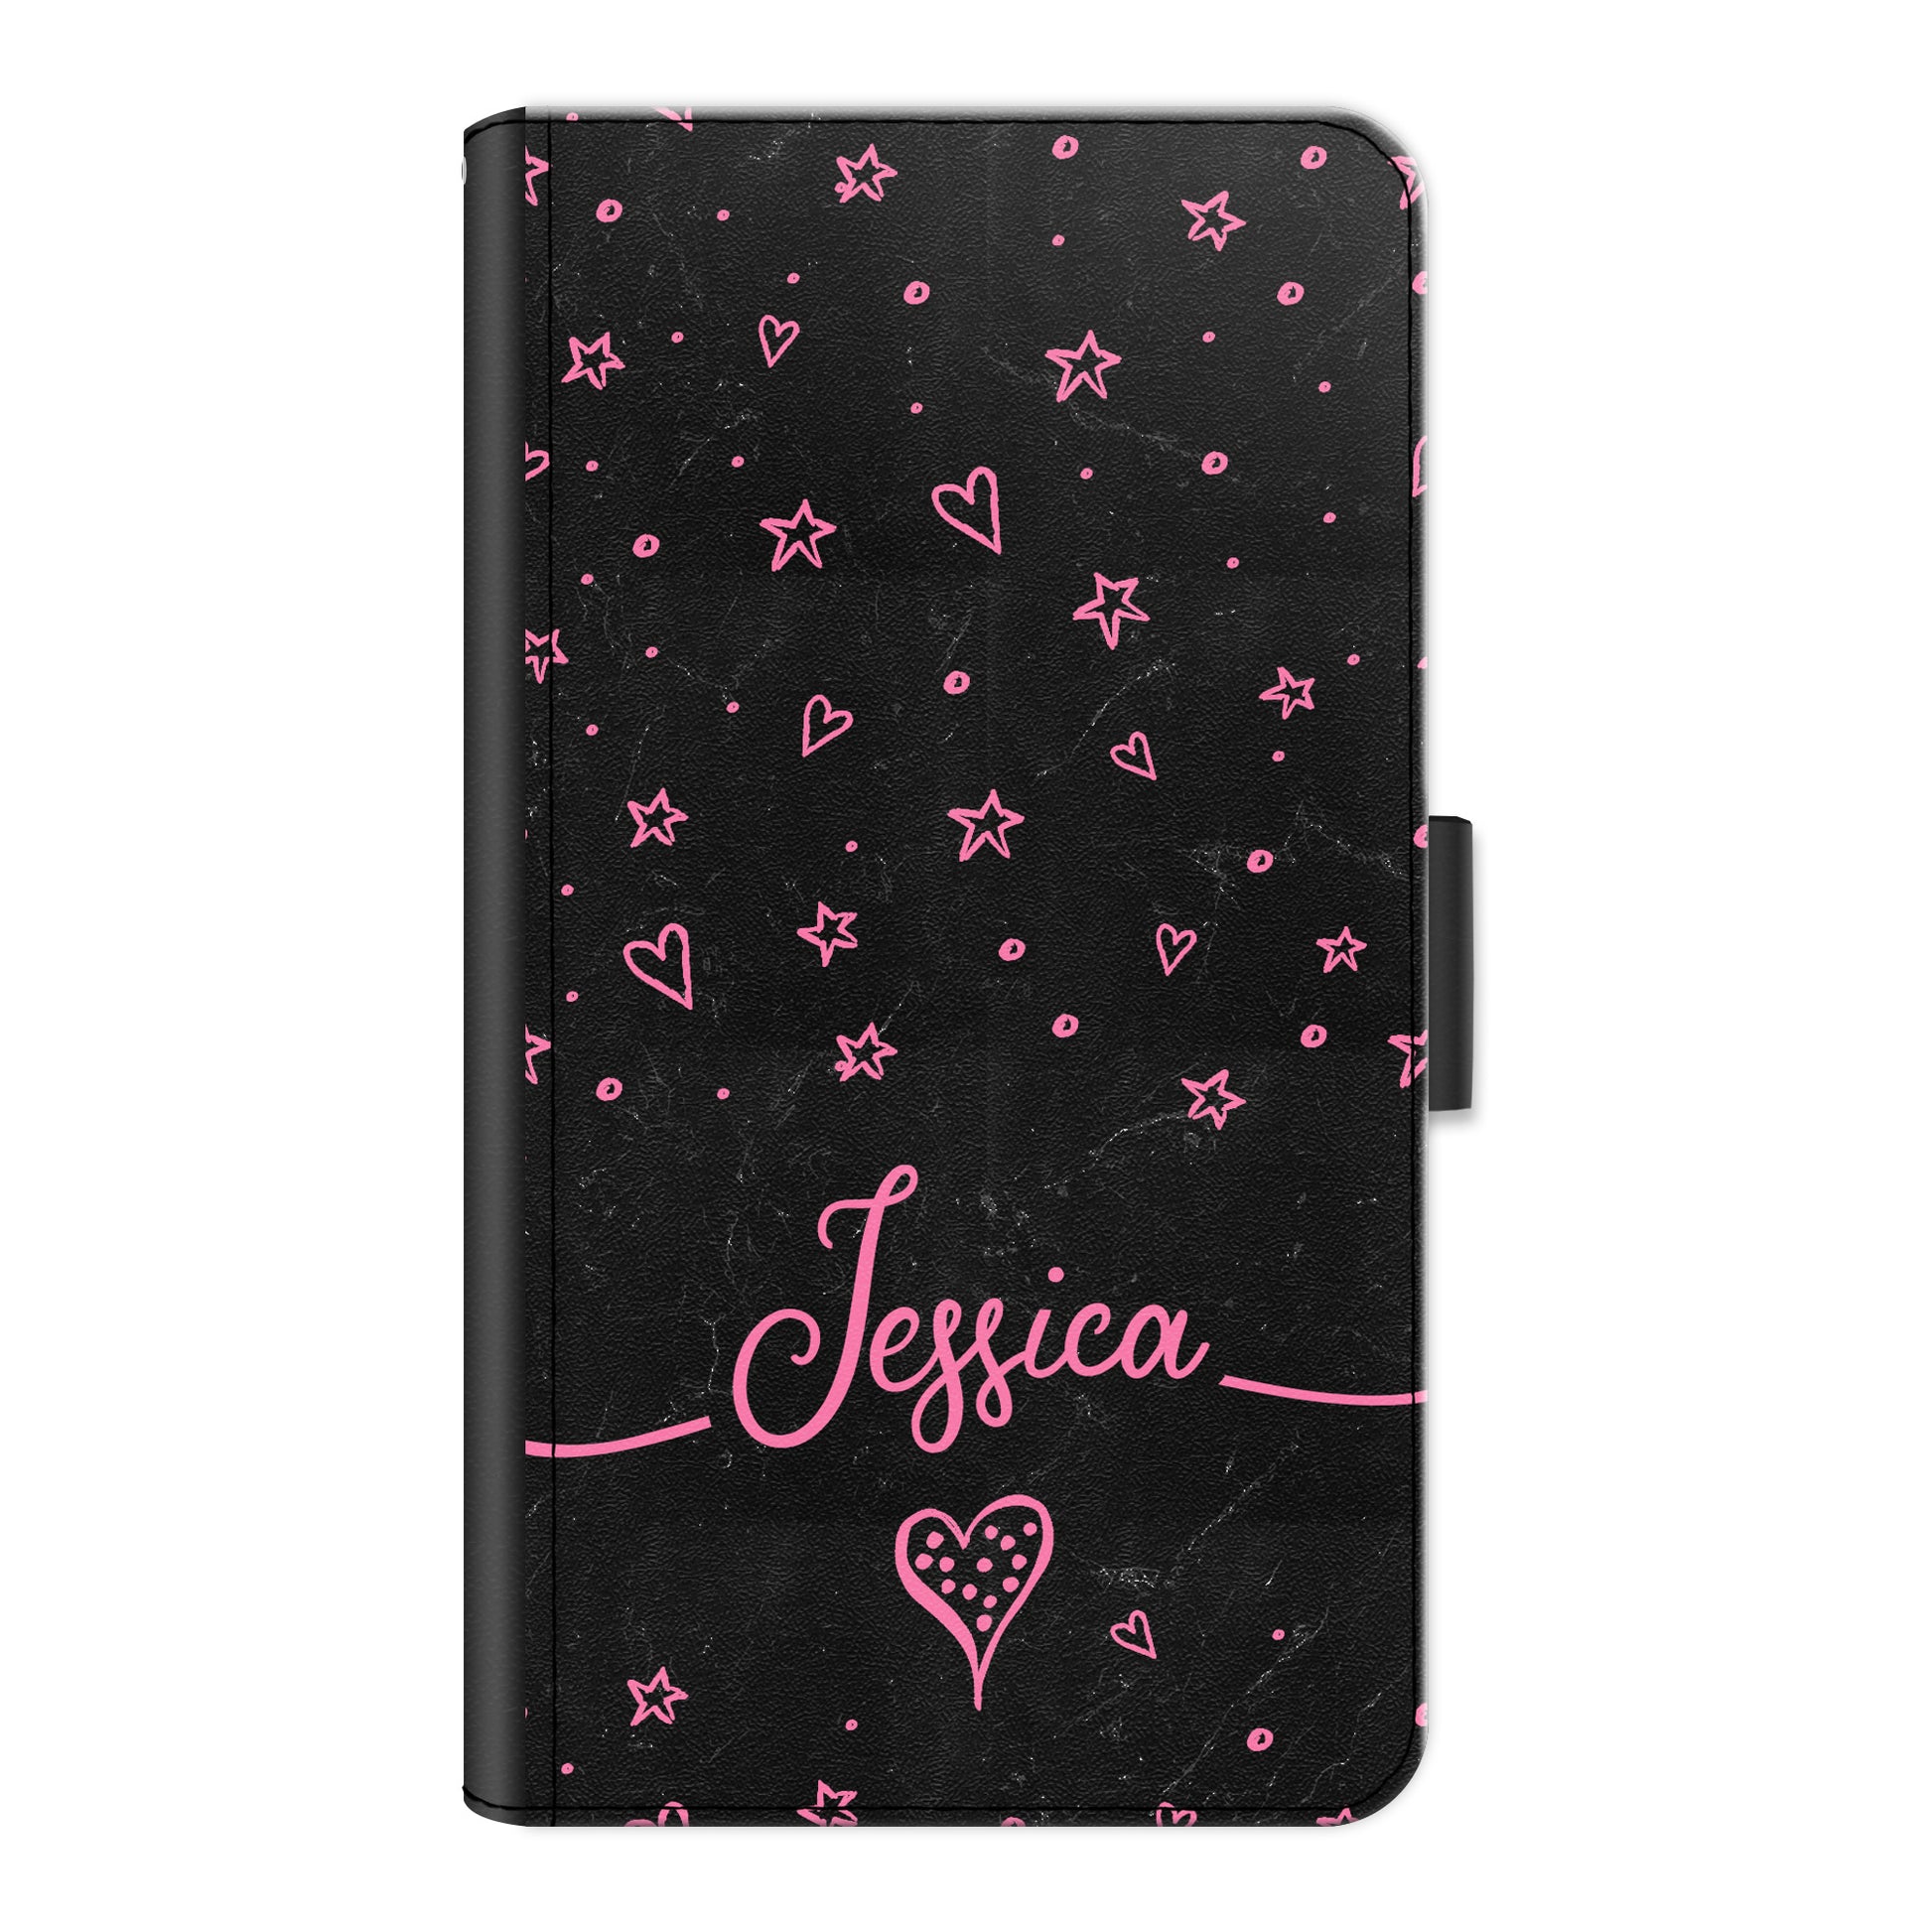 Personalised One Phone Leather Wallet with Pink Stylish text, Stars and Hearts on Black Marble